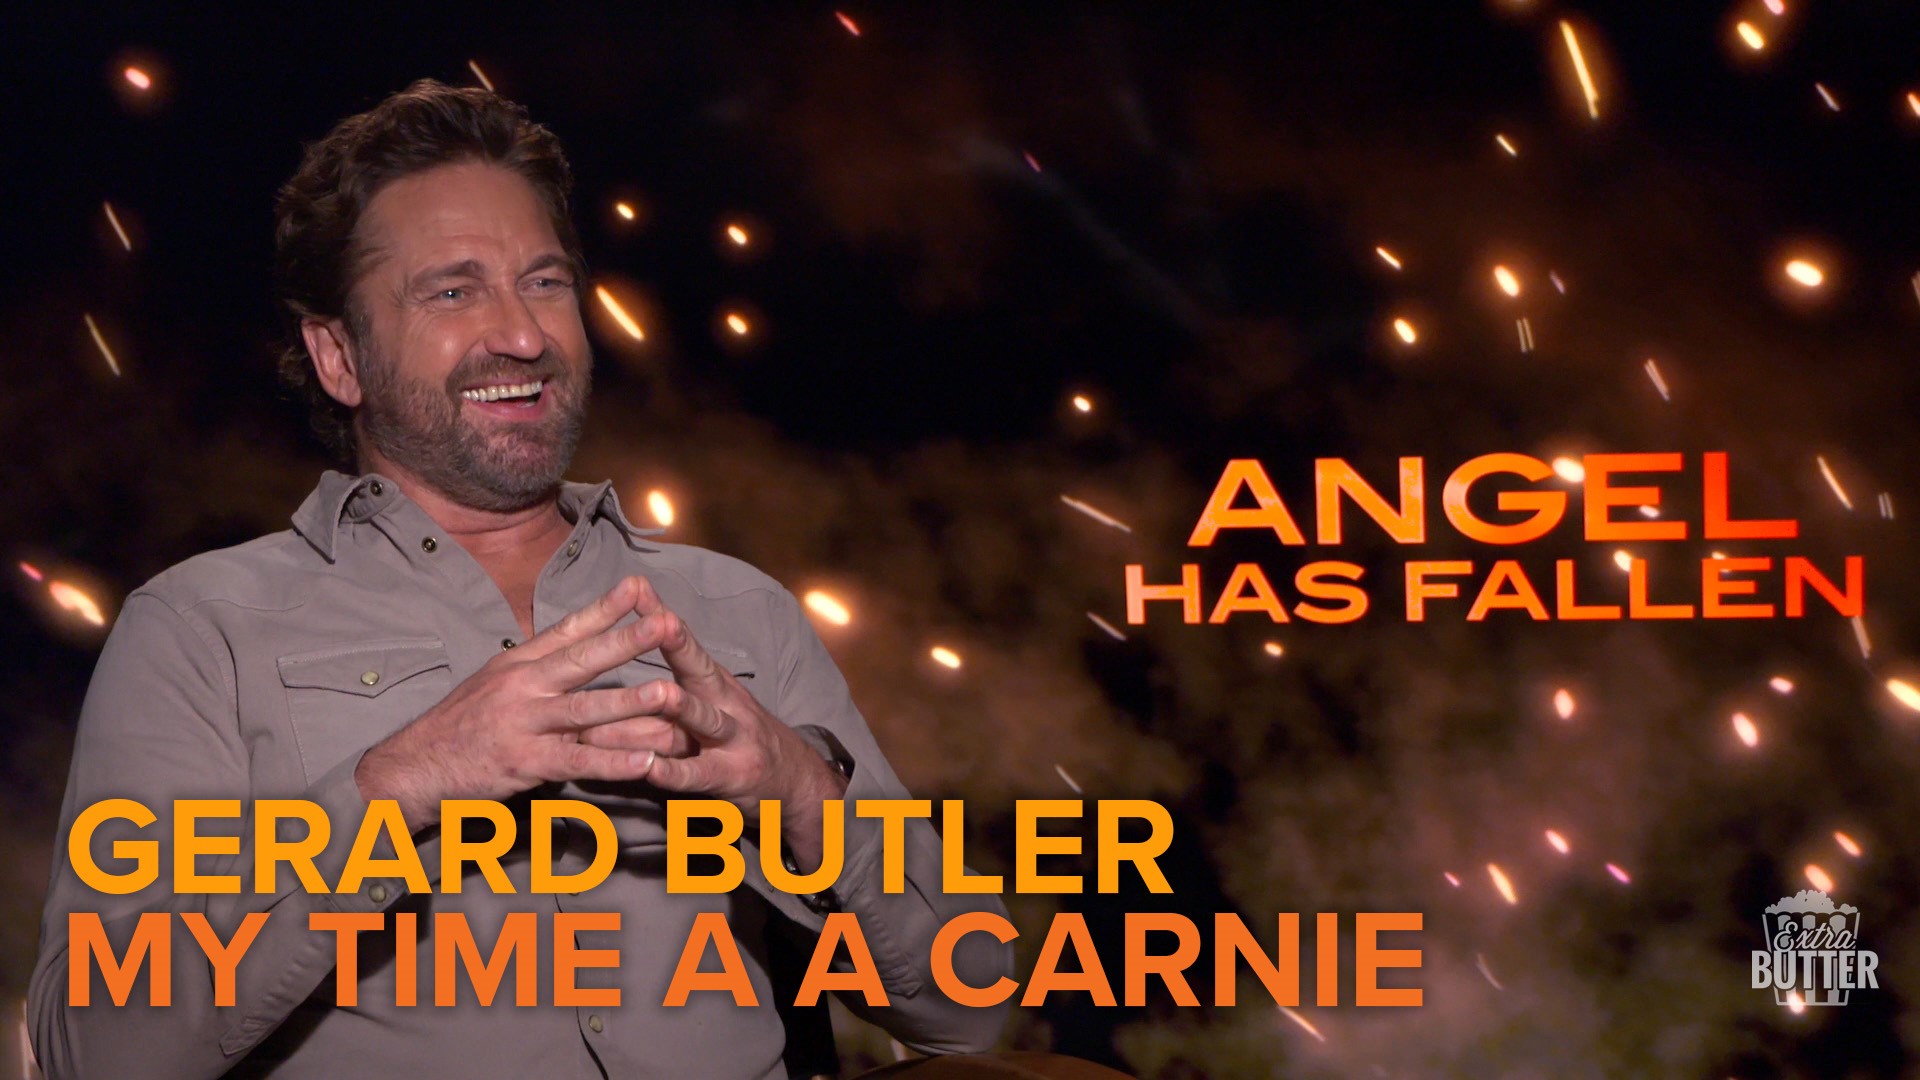 Gerard Butler talks about his time working as a carnie during an interview for his new movie, 'Angel has Fallen.' Gerard also tells Mark S. Allen what drew him back to the franchise.